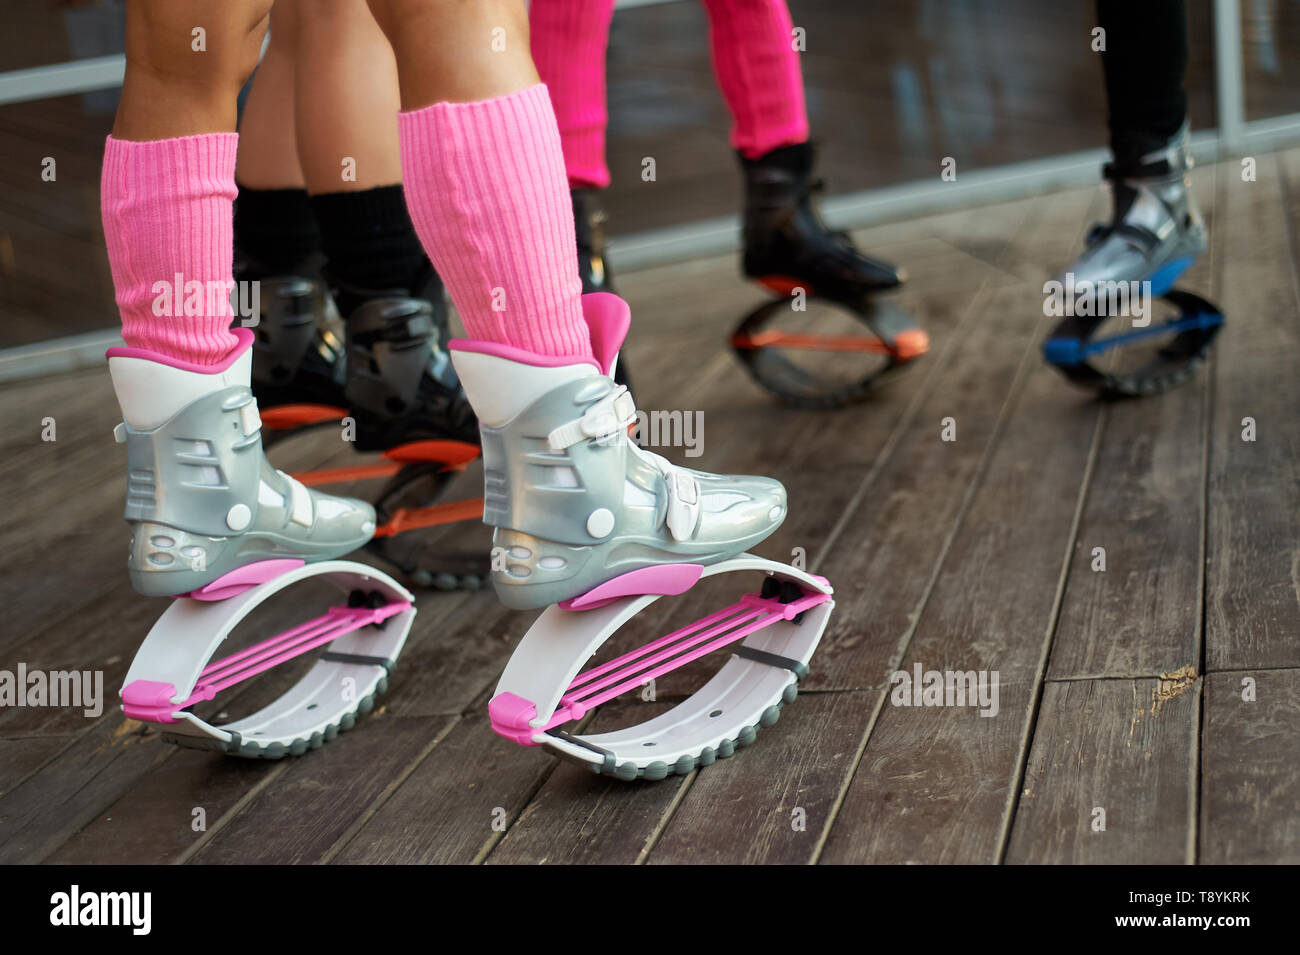 group of womens legs in kangoo jumping boots. outdoor fitness